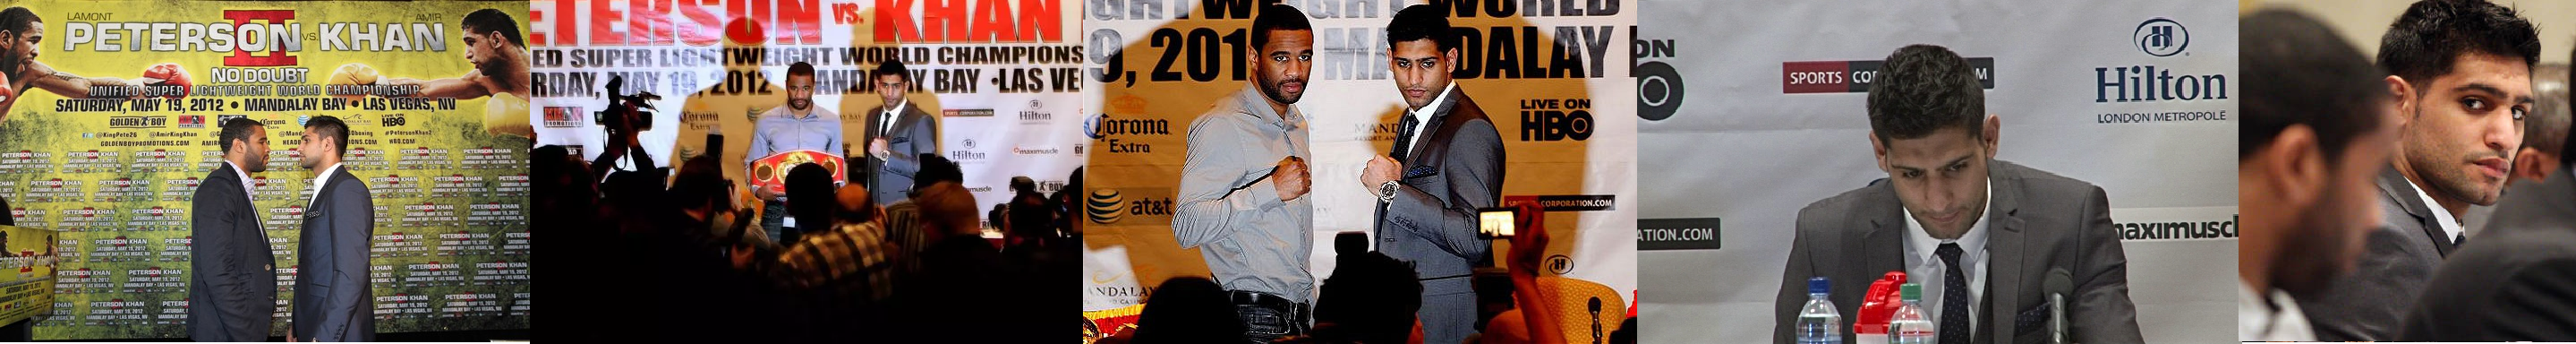 sincura manage press conference for lamont peterson vs amir khan